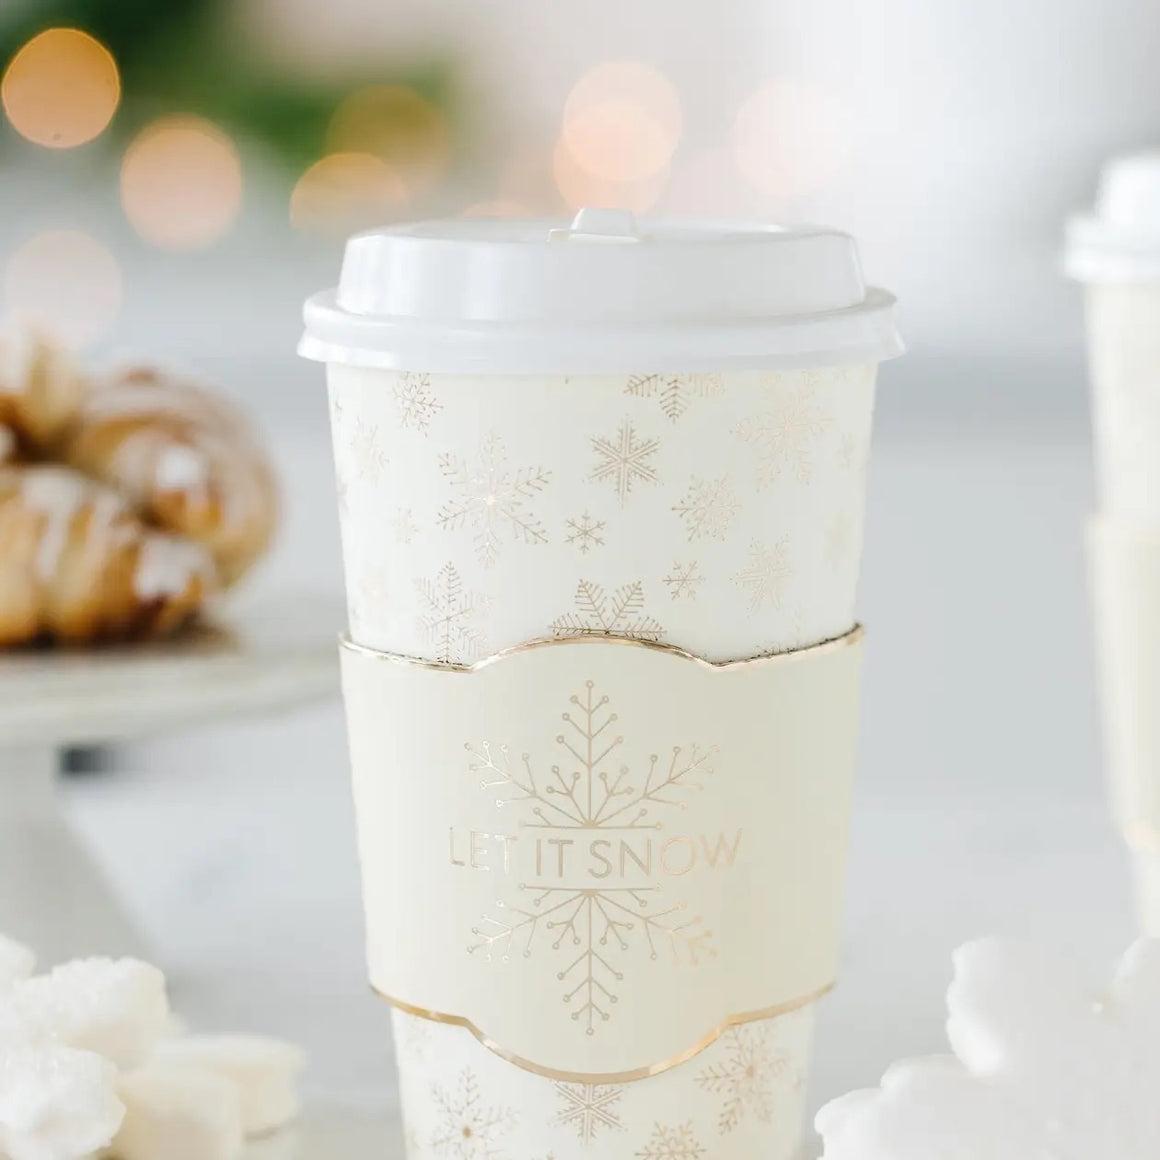 COZY TO-GO CUPS - GLAM GOLD + CREAM LET IT SNOW